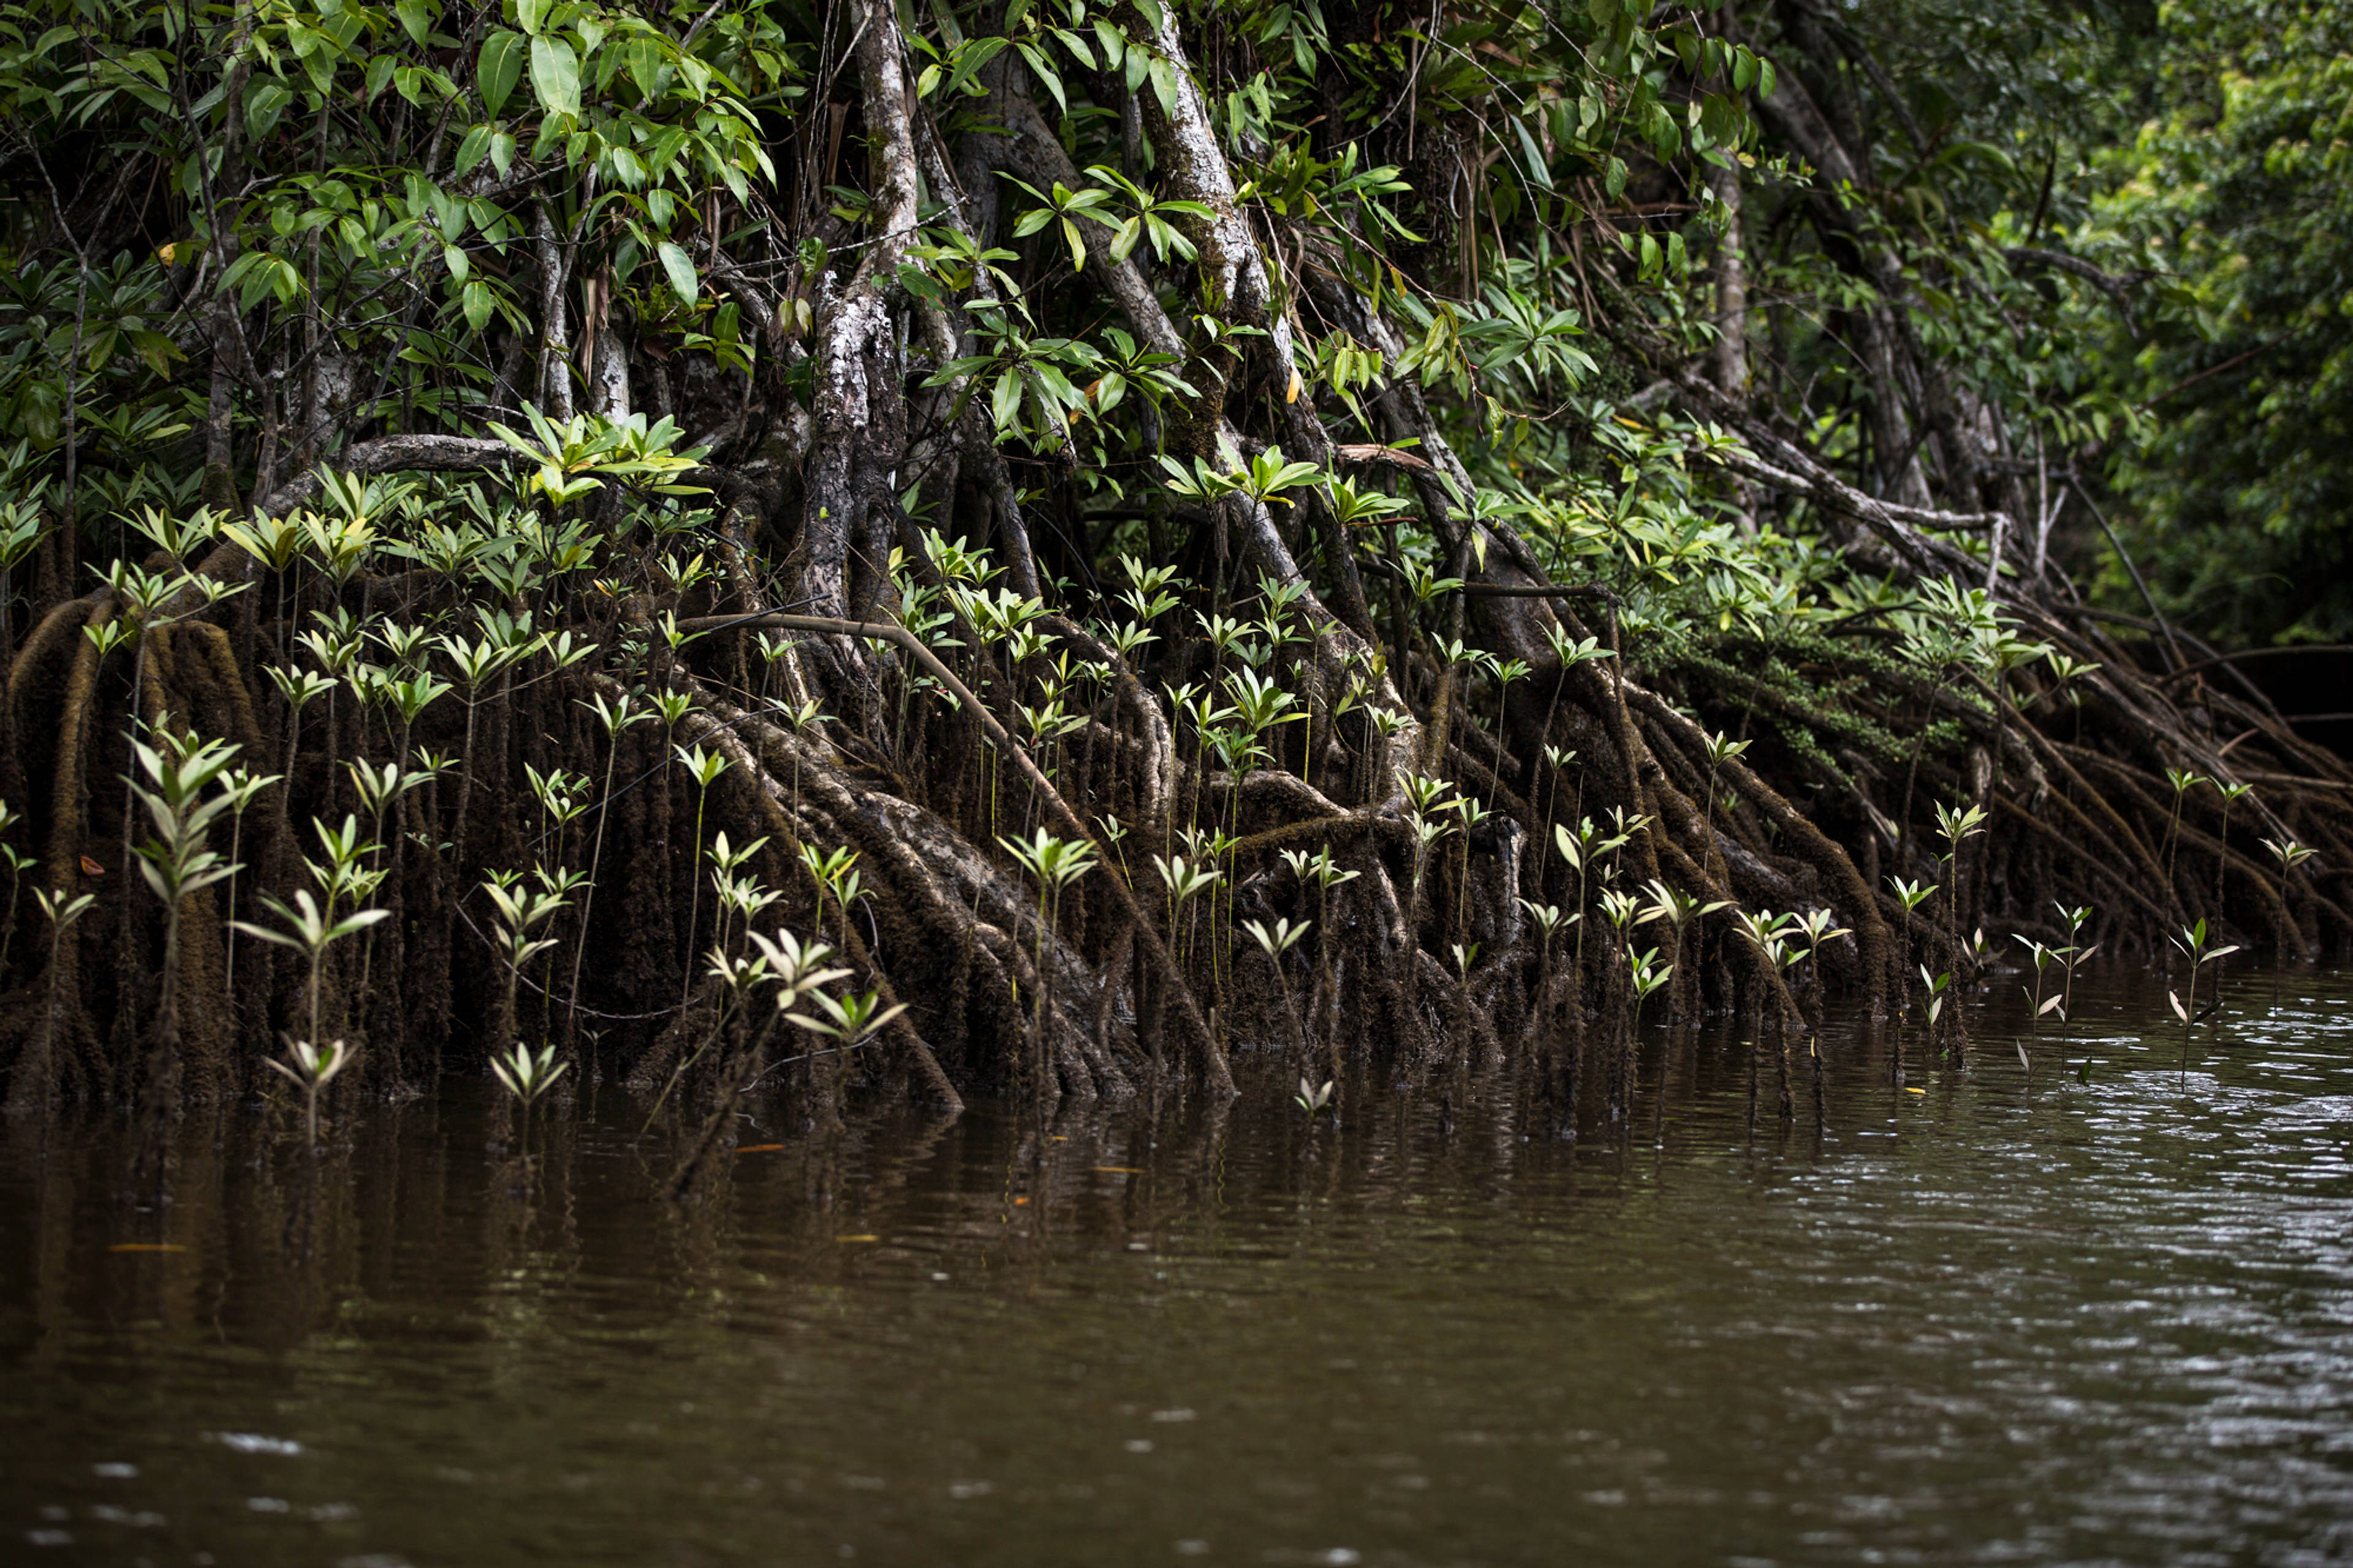 Ecosystems found within the Chocó-Darien bioregion include mangroves, swamps, flooded forests, dry, wet and cloud forests, and páramo at elevation. (Photo Credit: Hans Rippe)